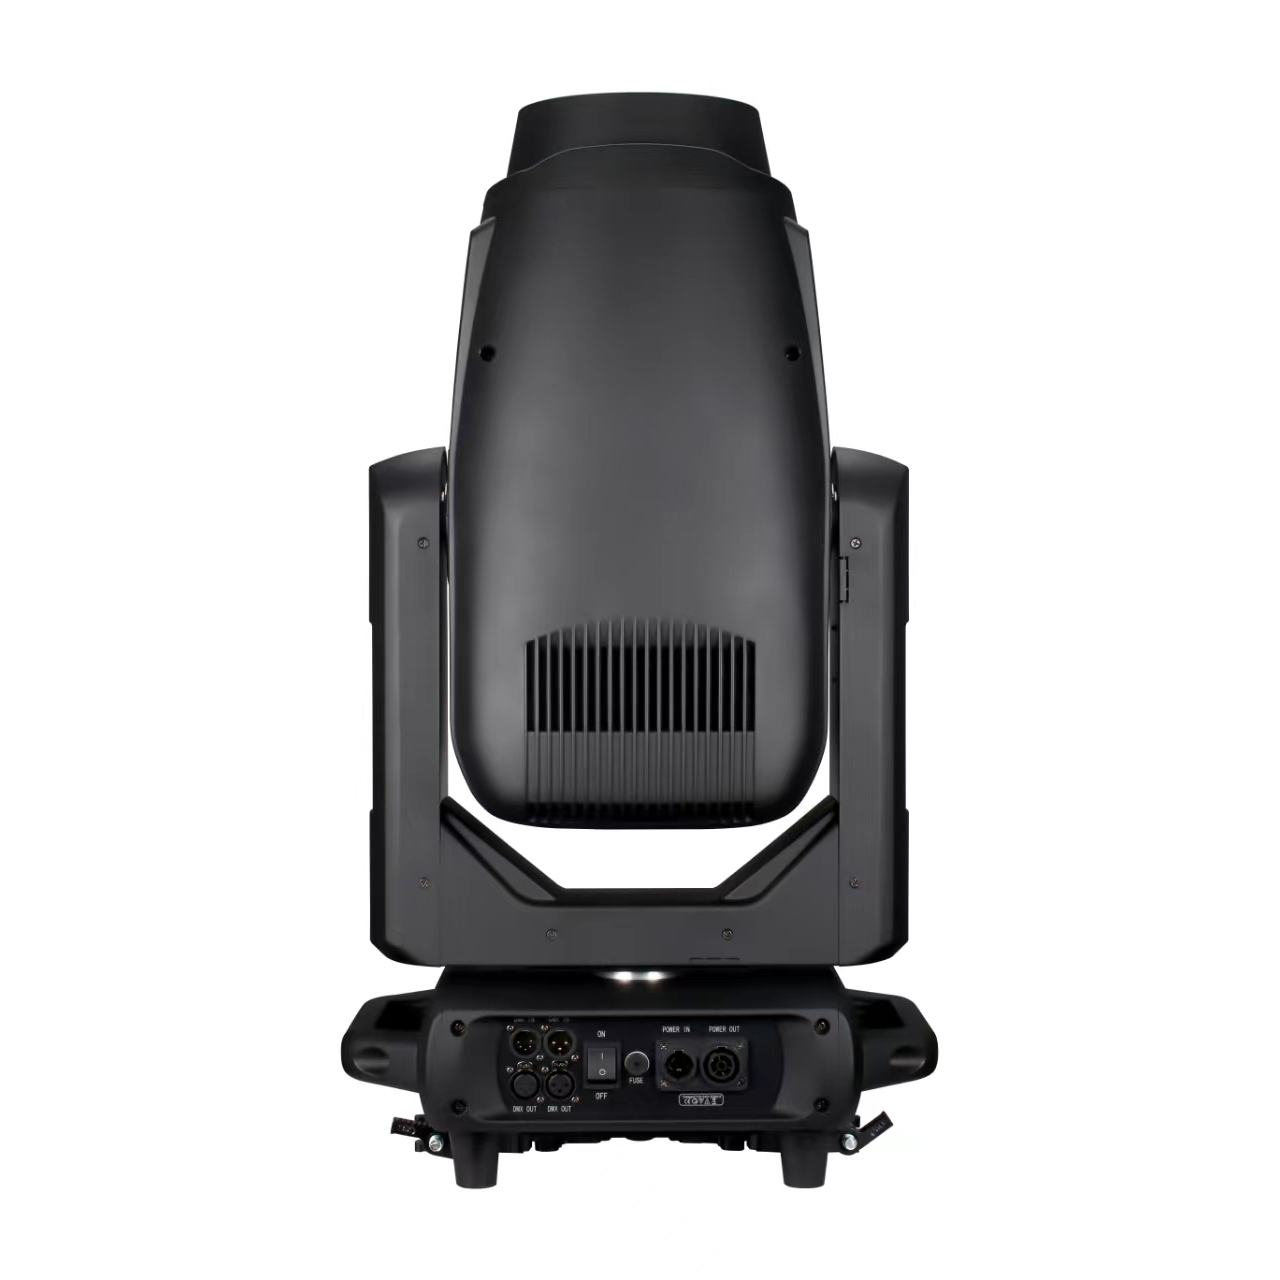 New Compact Size 1000W Framing CMY CTO Moving Head Spot Light FD-LF1000BSWA